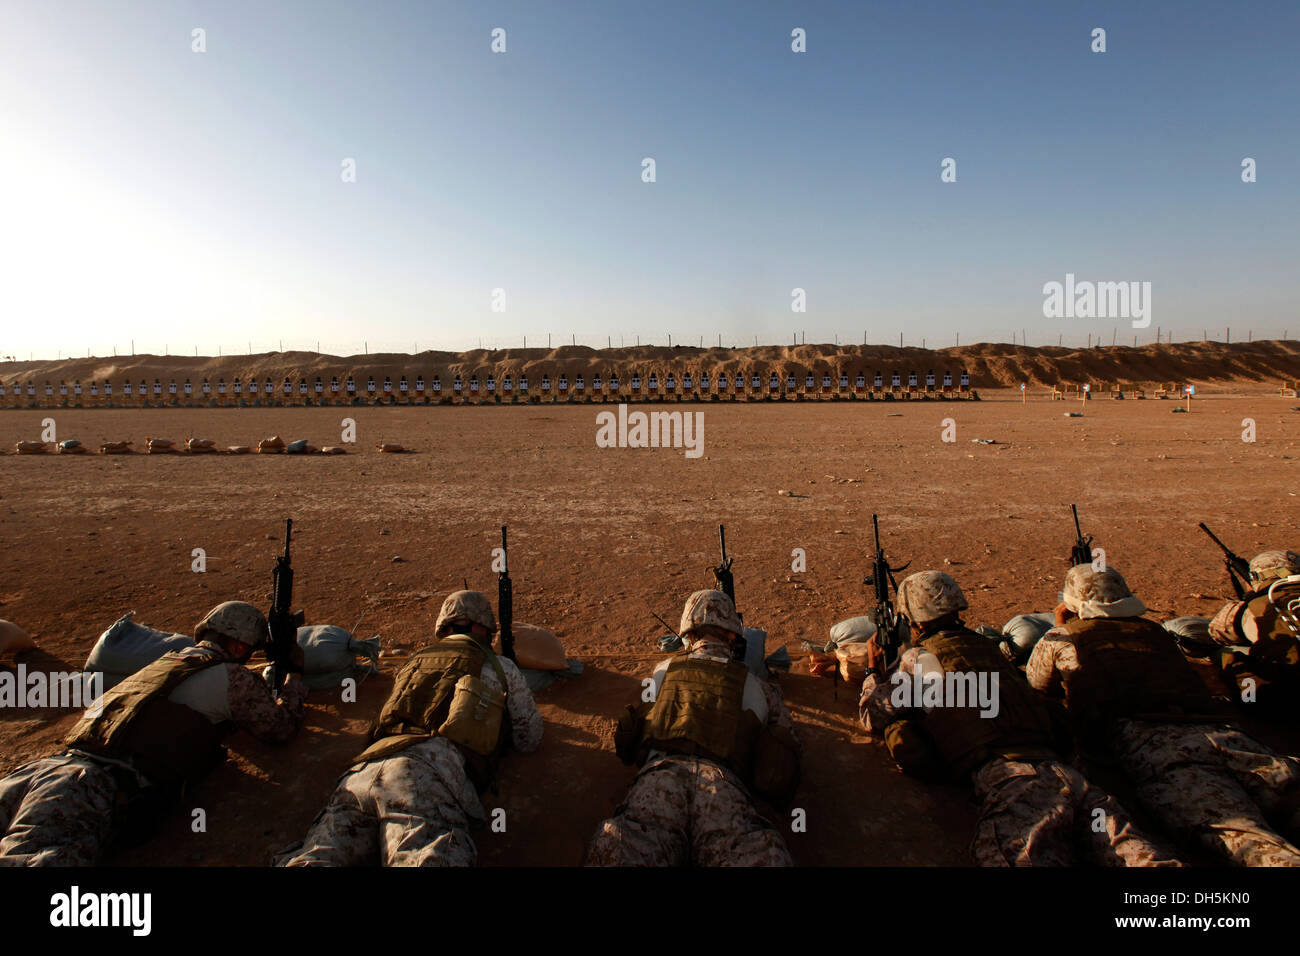 U.S. Marines with Headquarters, 2nd Marine Aircraft Wing (Forward), conduct a Battle Sight Zero (BZO) range at Camp Leatherneck, Helmand province, Afghanistan, Oct. 25, 2013. A BZO was performed to maintain proficiency with the M16/M4 service rifles issue Stock Photo